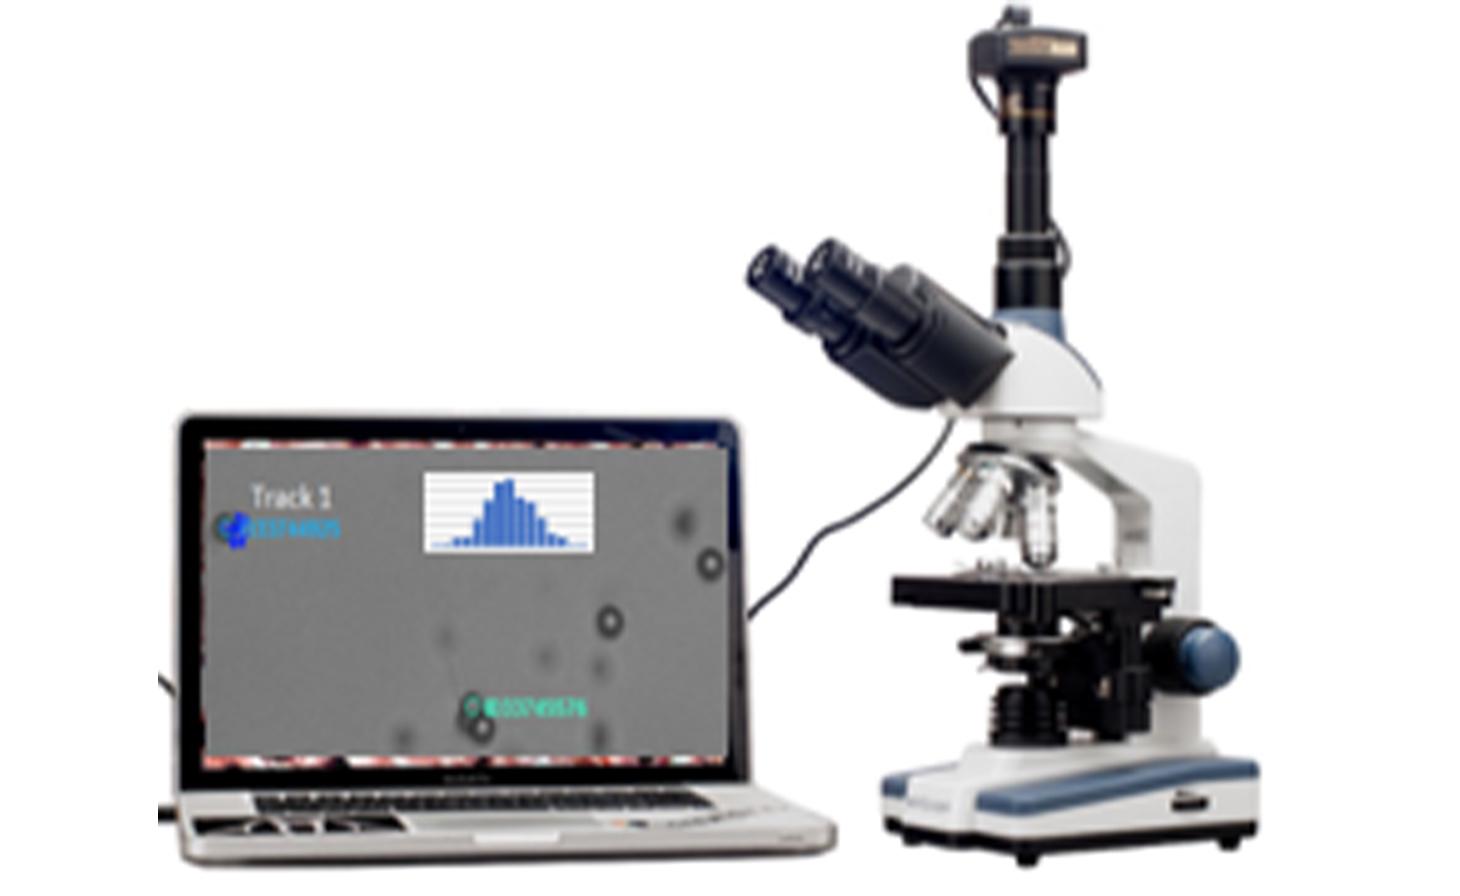 A stock image of a microscope hooked up to a laptop measuring data.